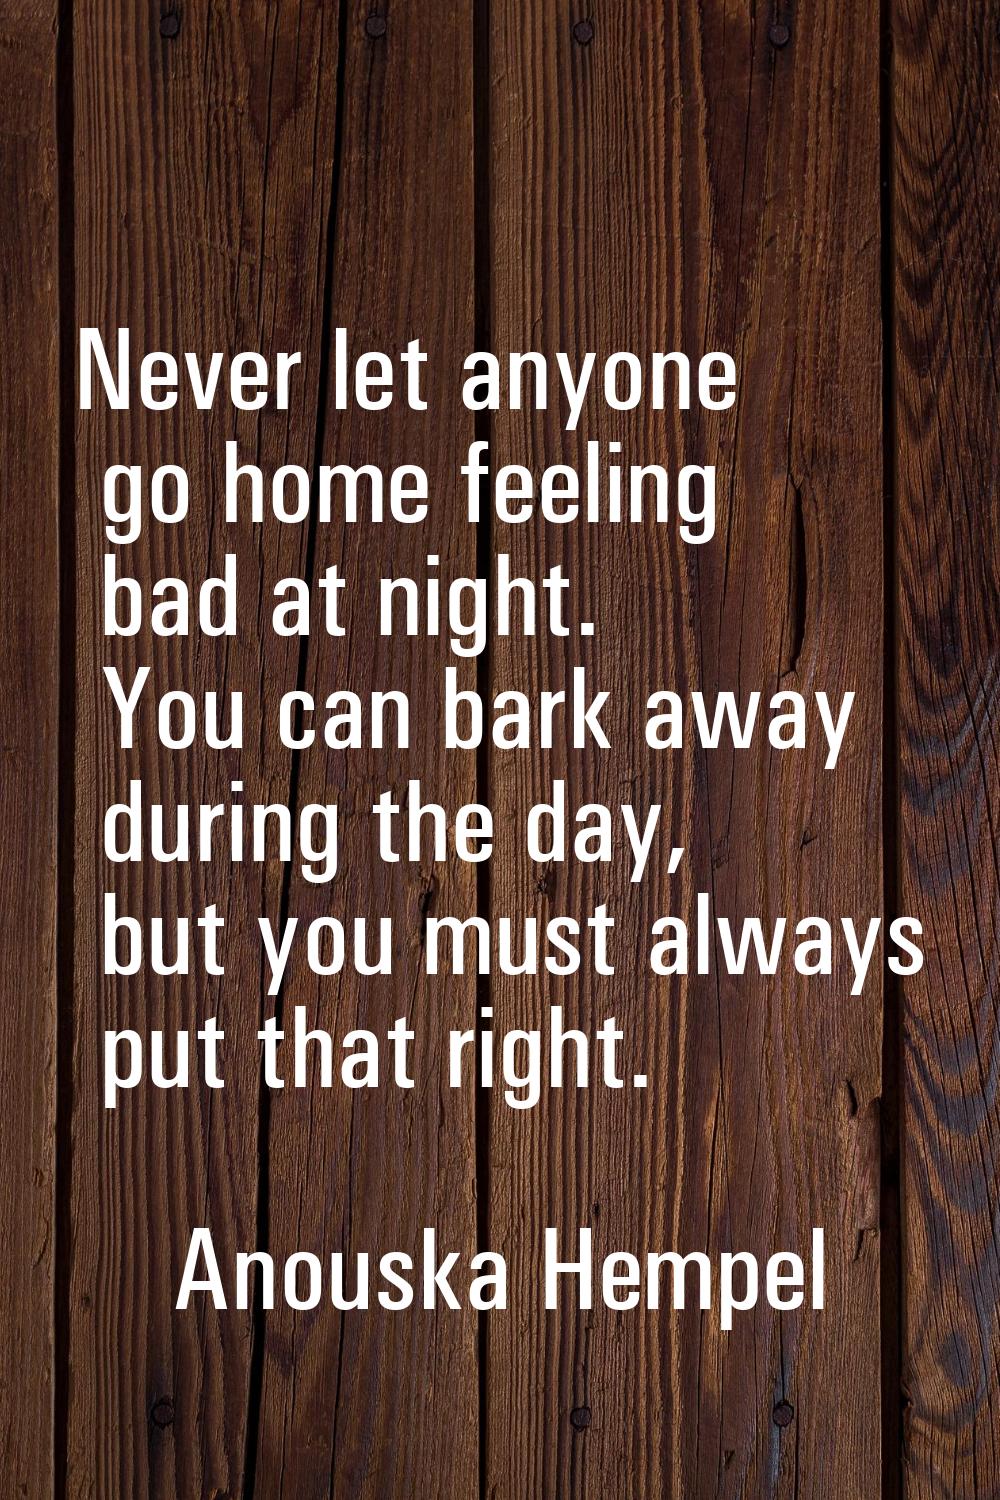 Never let anyone go home feeling bad at night. You can bark away during the day, but you must alway